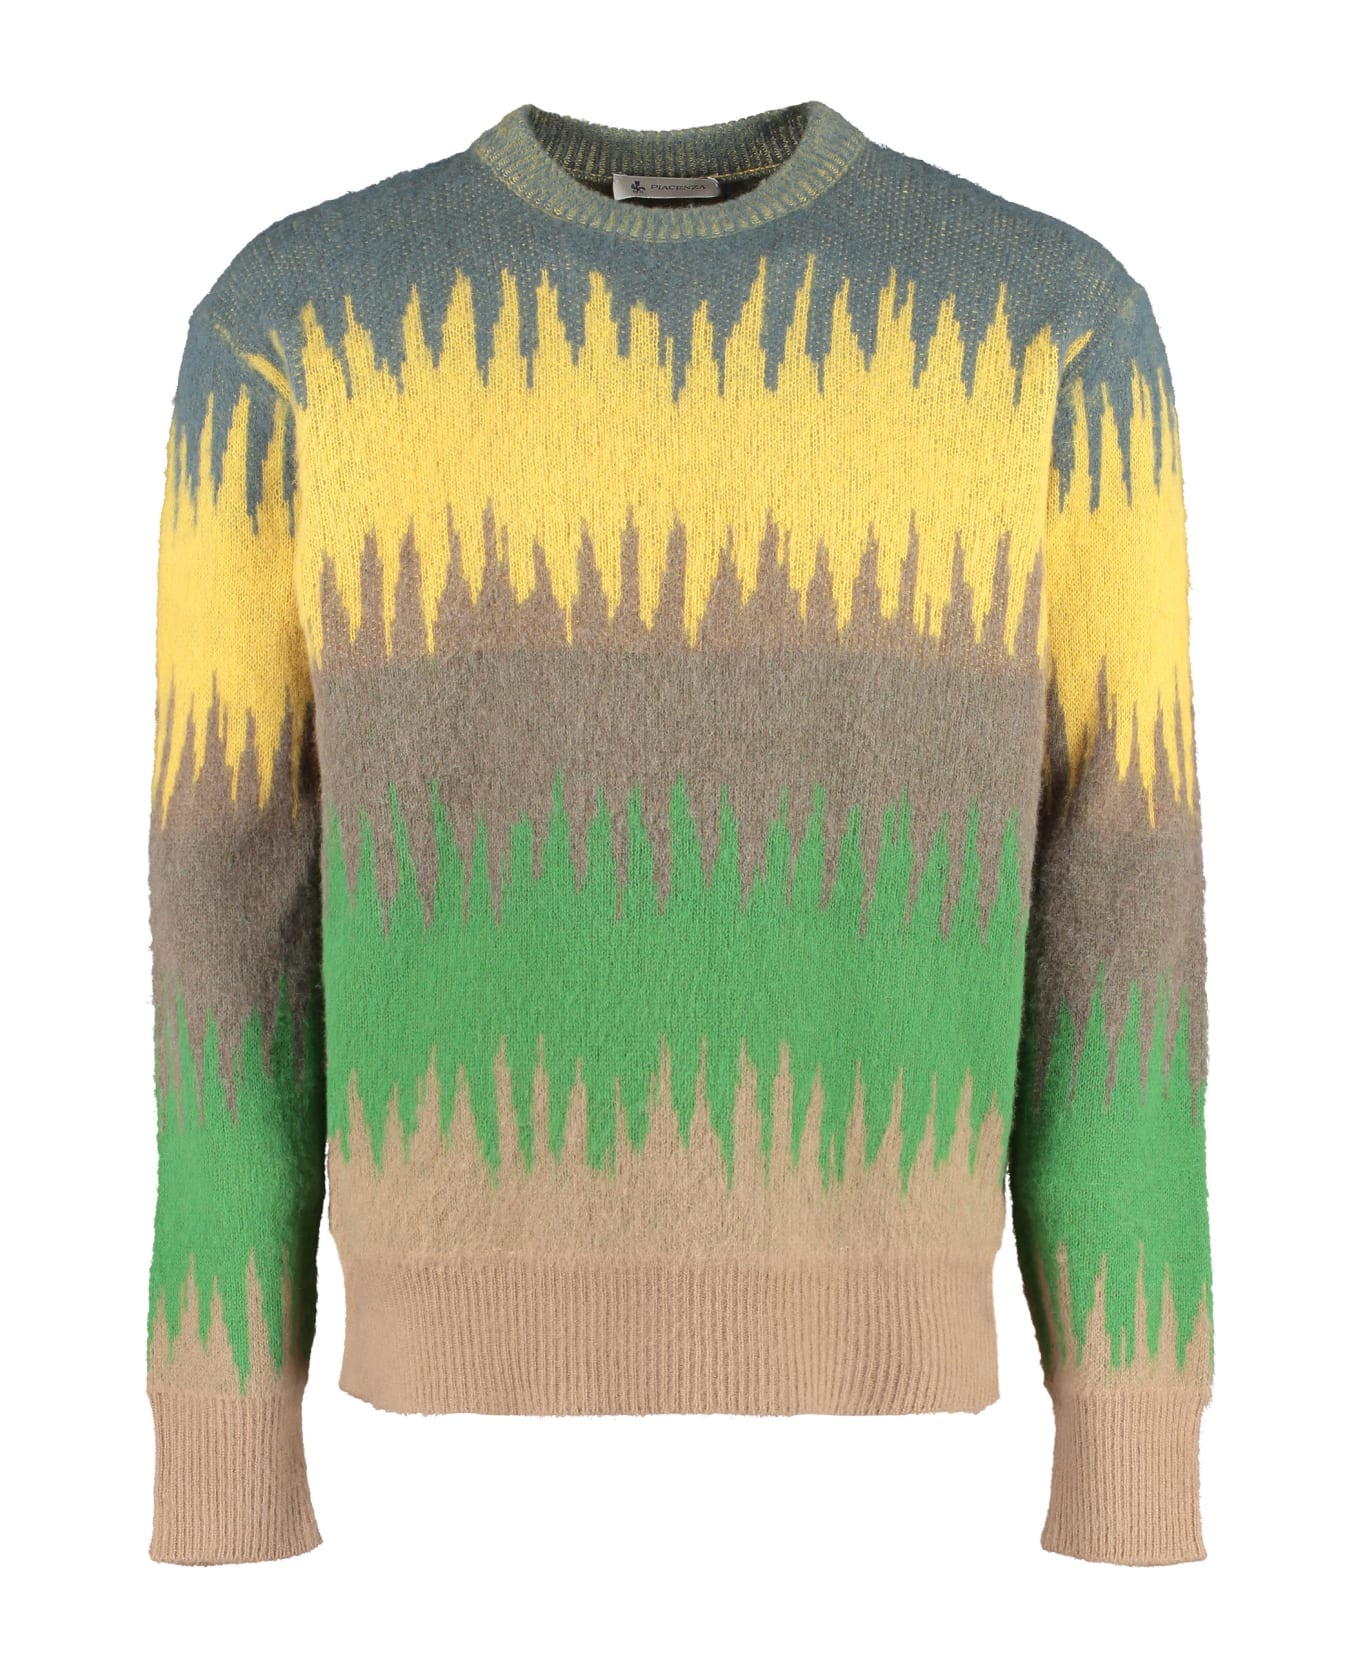 Piacenza shirt Crew-neck Wool Sweater - Multicolor